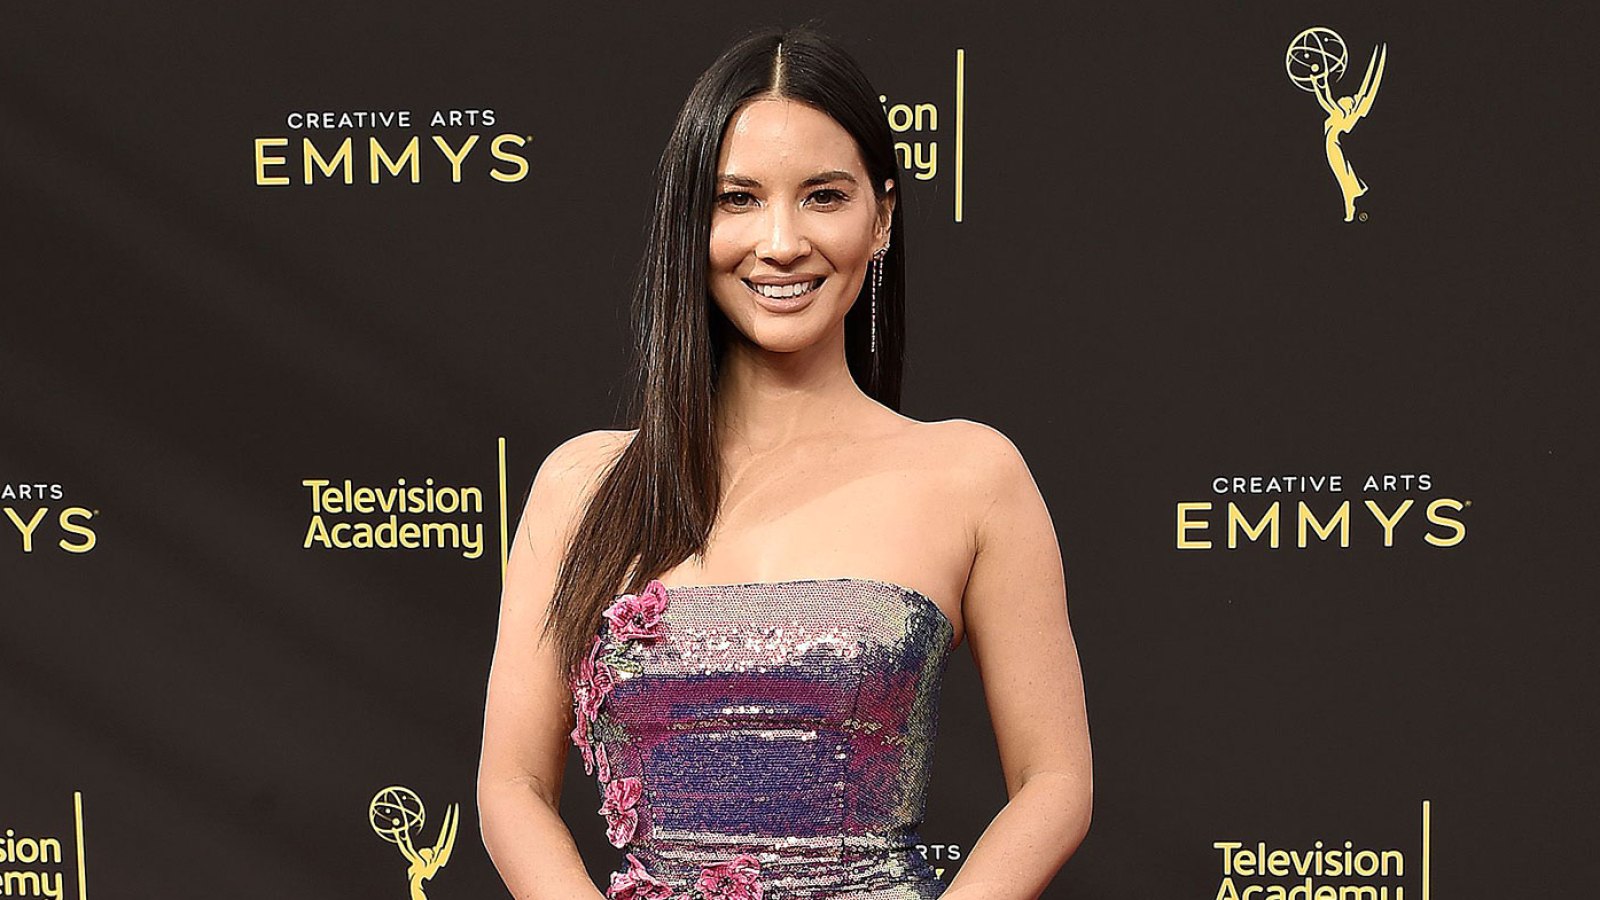 Pregnant Olivia Munn Looking Forward to Most About Motherhood